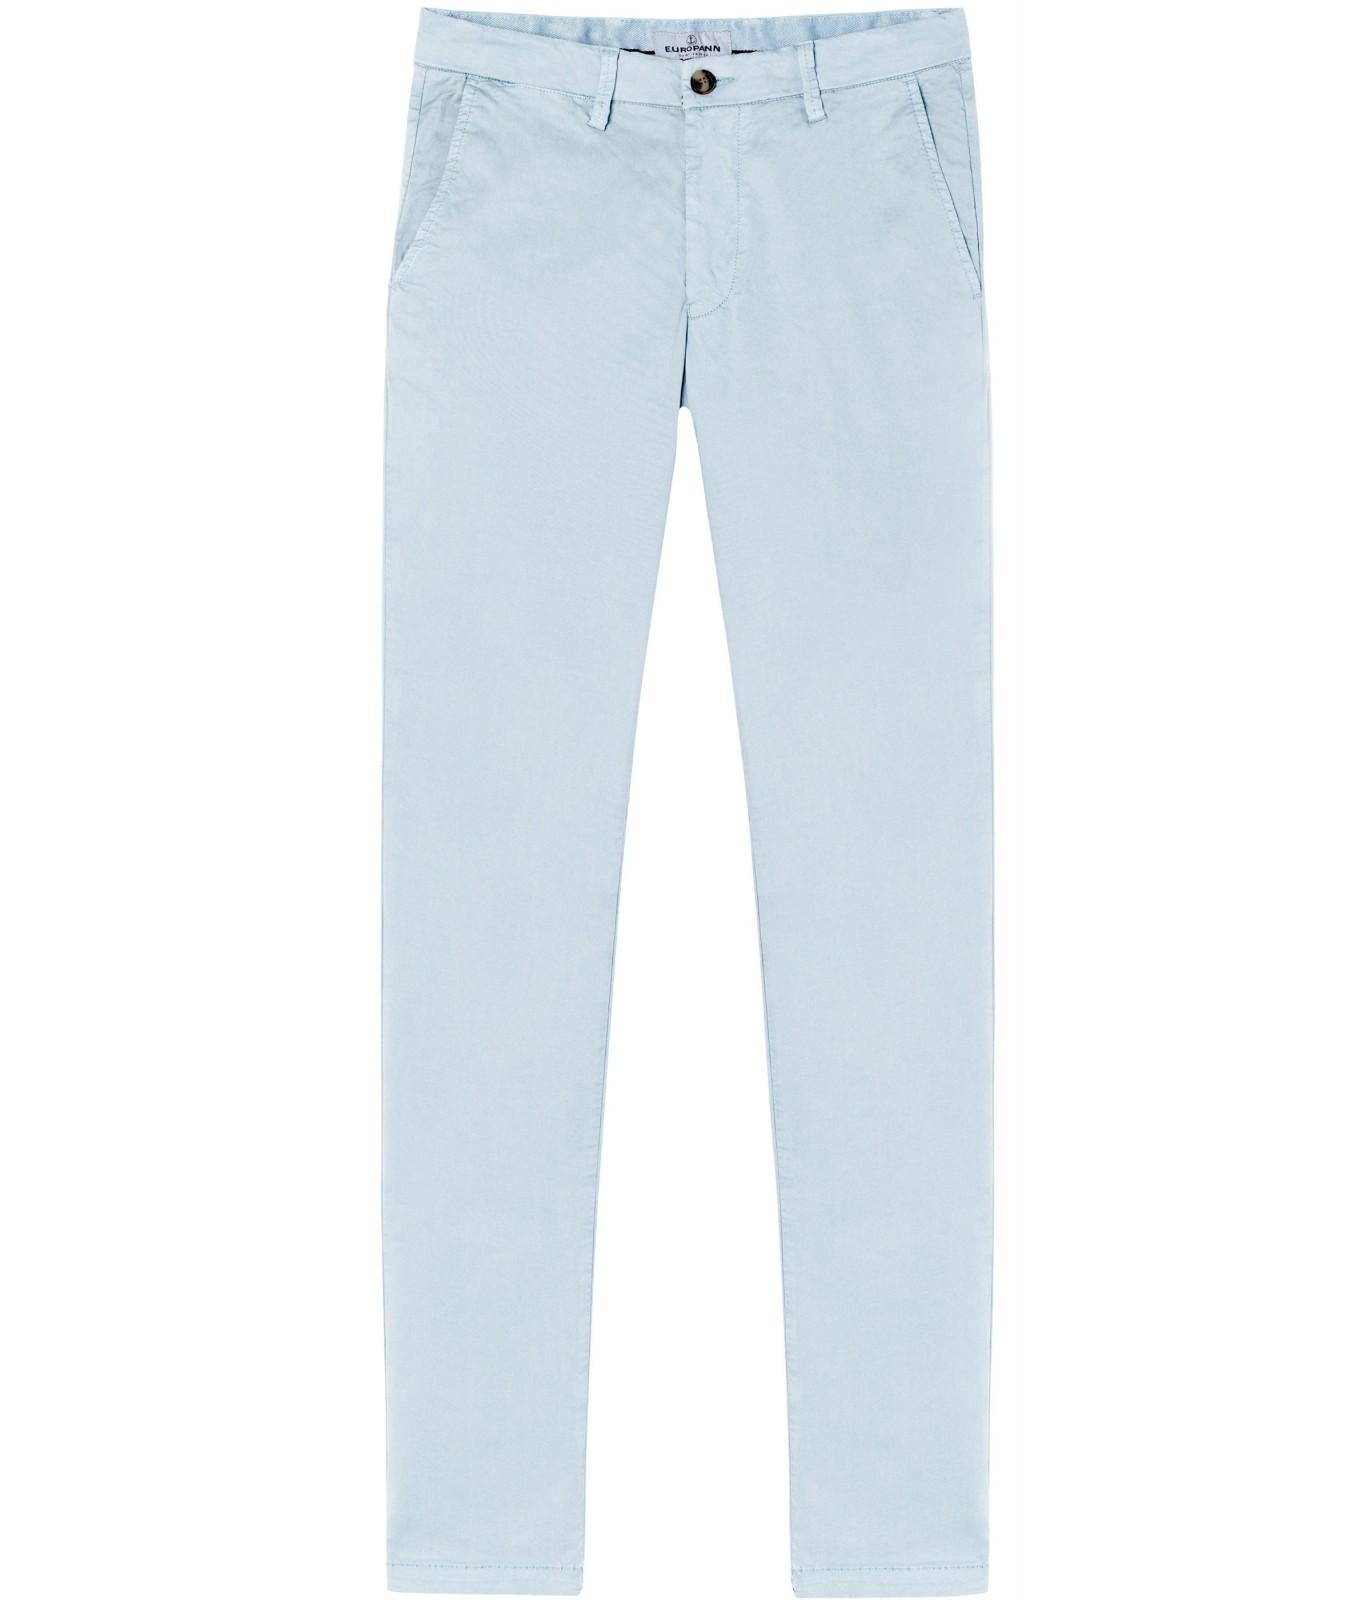 Shop the Trendy High Waisted Smoky Blue Pants Now - Nolabels.in